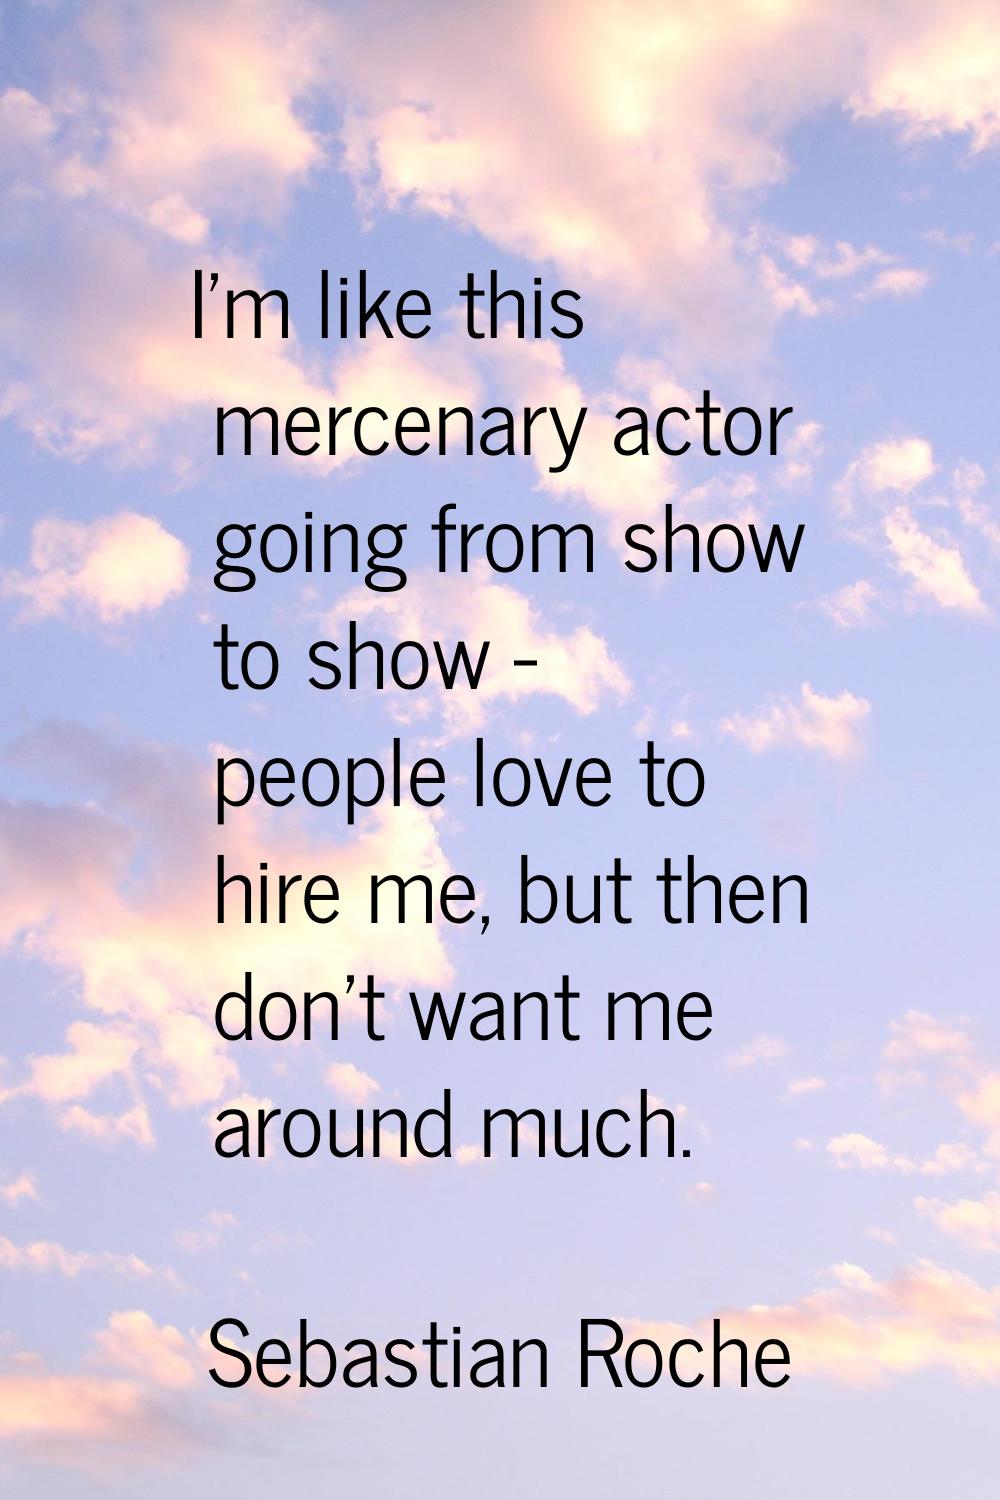 I'm like this mercenary actor going from show to show - people love to hire me, but then don't want